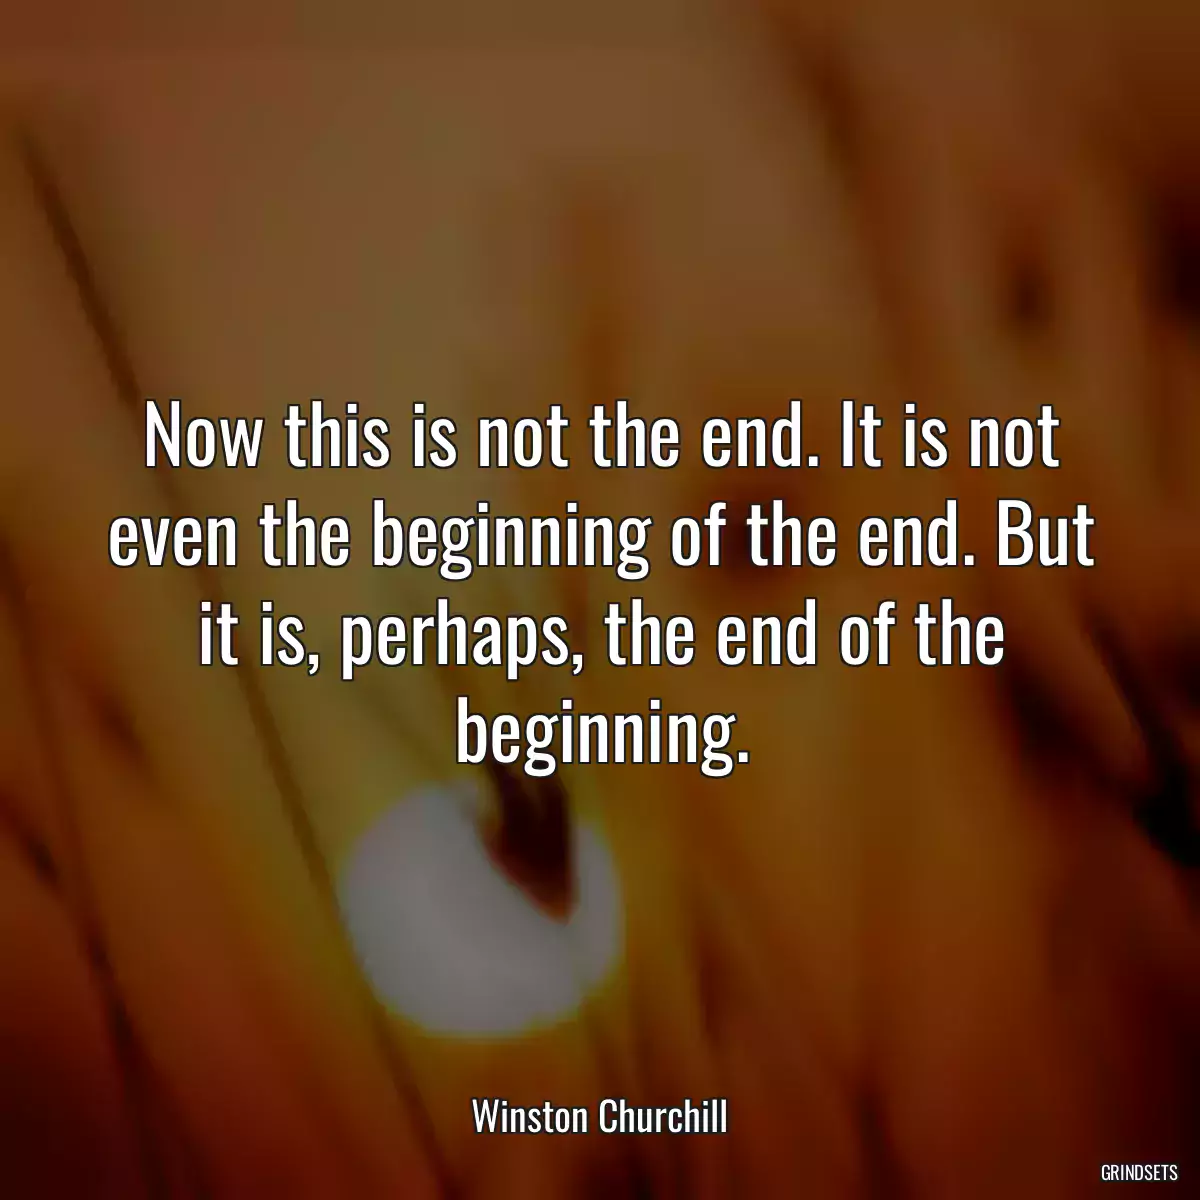 Now this is not the end. It is not even the beginning of the end. But it is, perhaps, the end of the beginning.